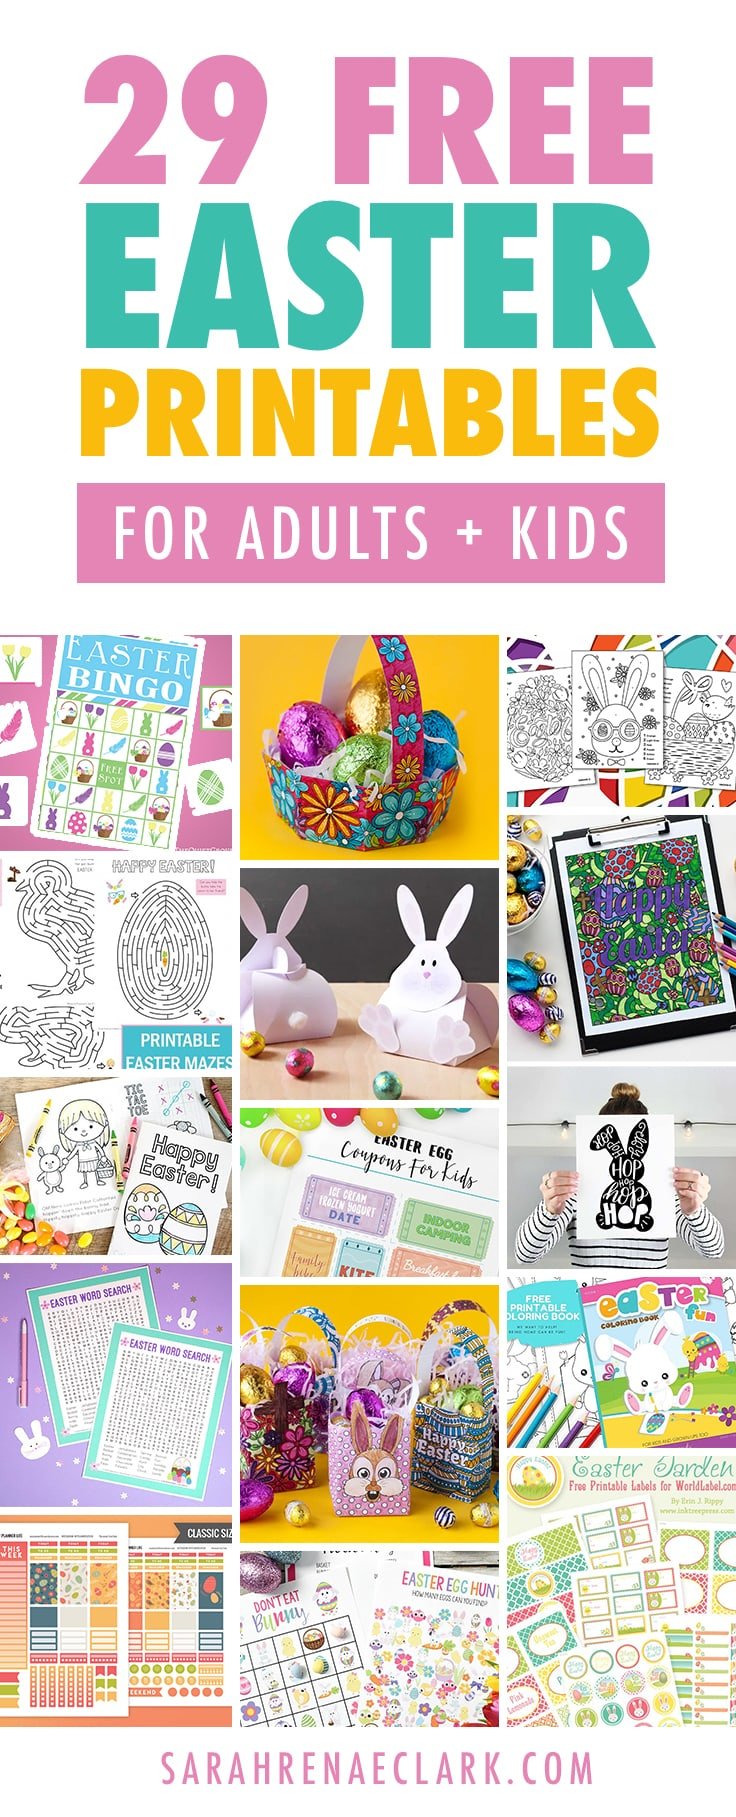 29 Best FREE Easter Printables for Kids &amp; Adults: Coloring, games &amp; more